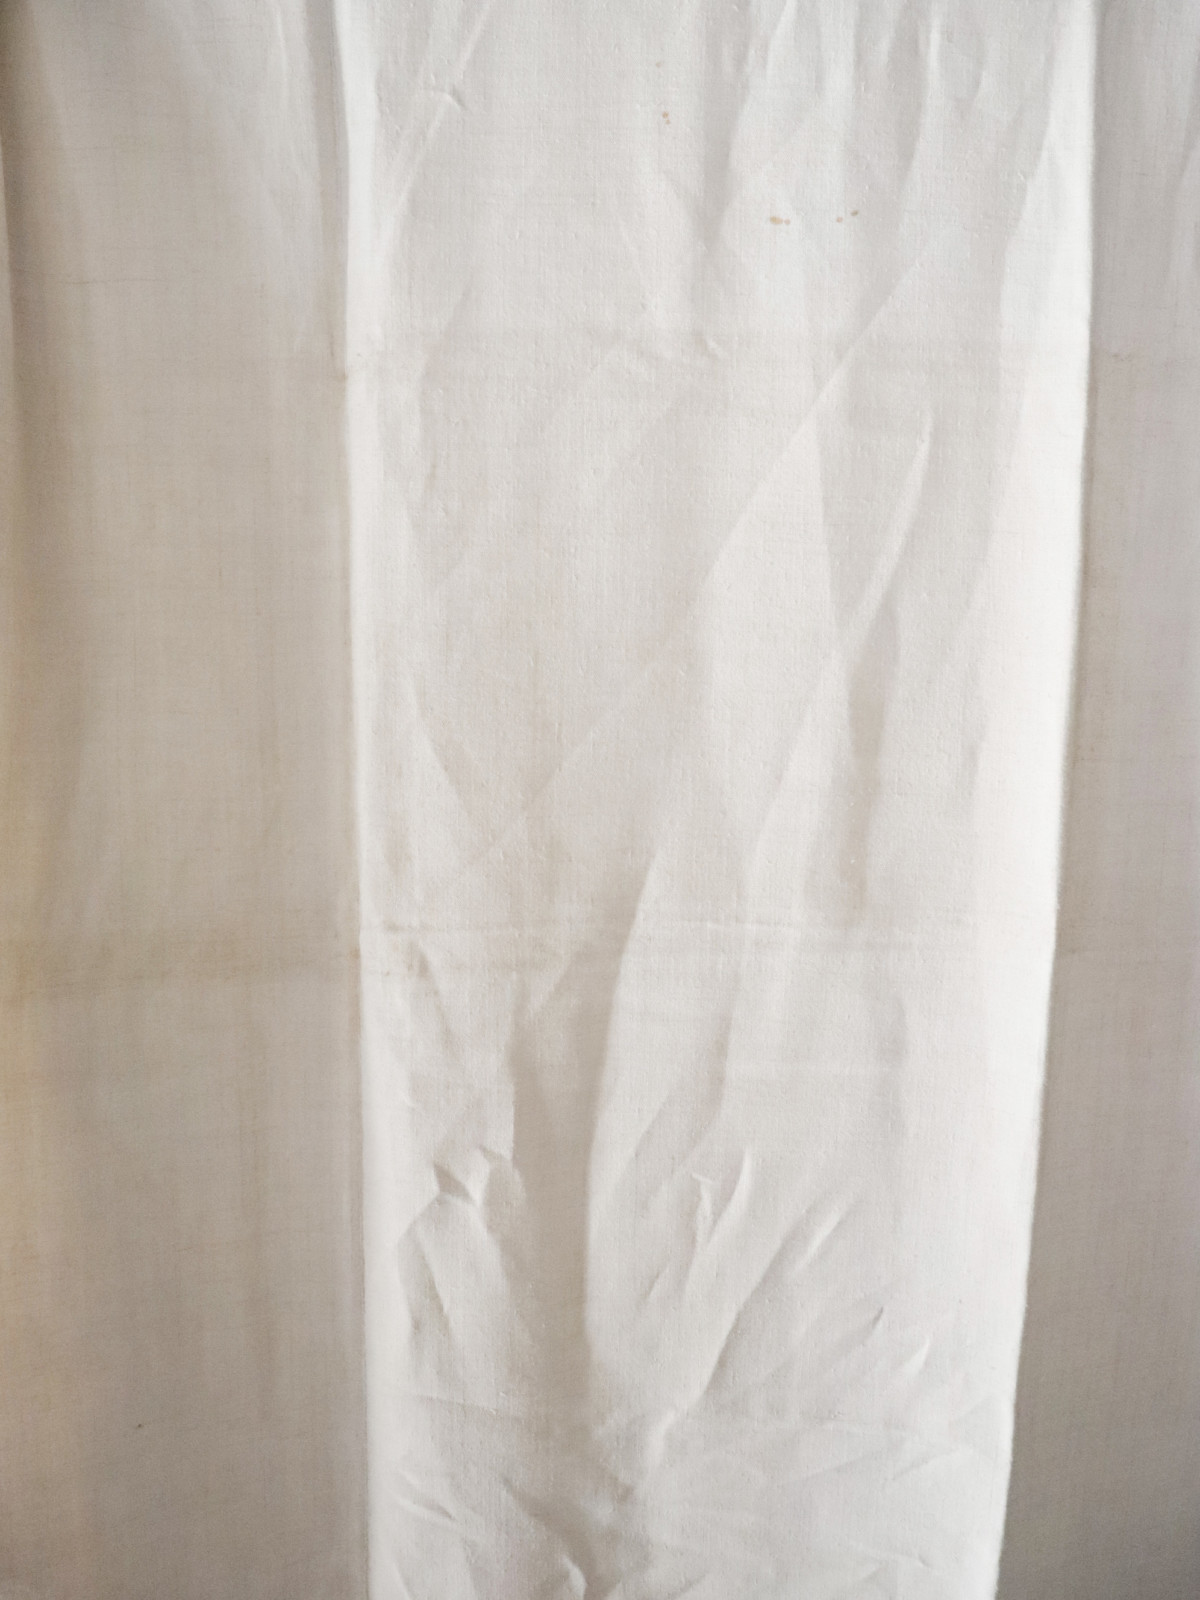 Early1900’s,french linen,sheet